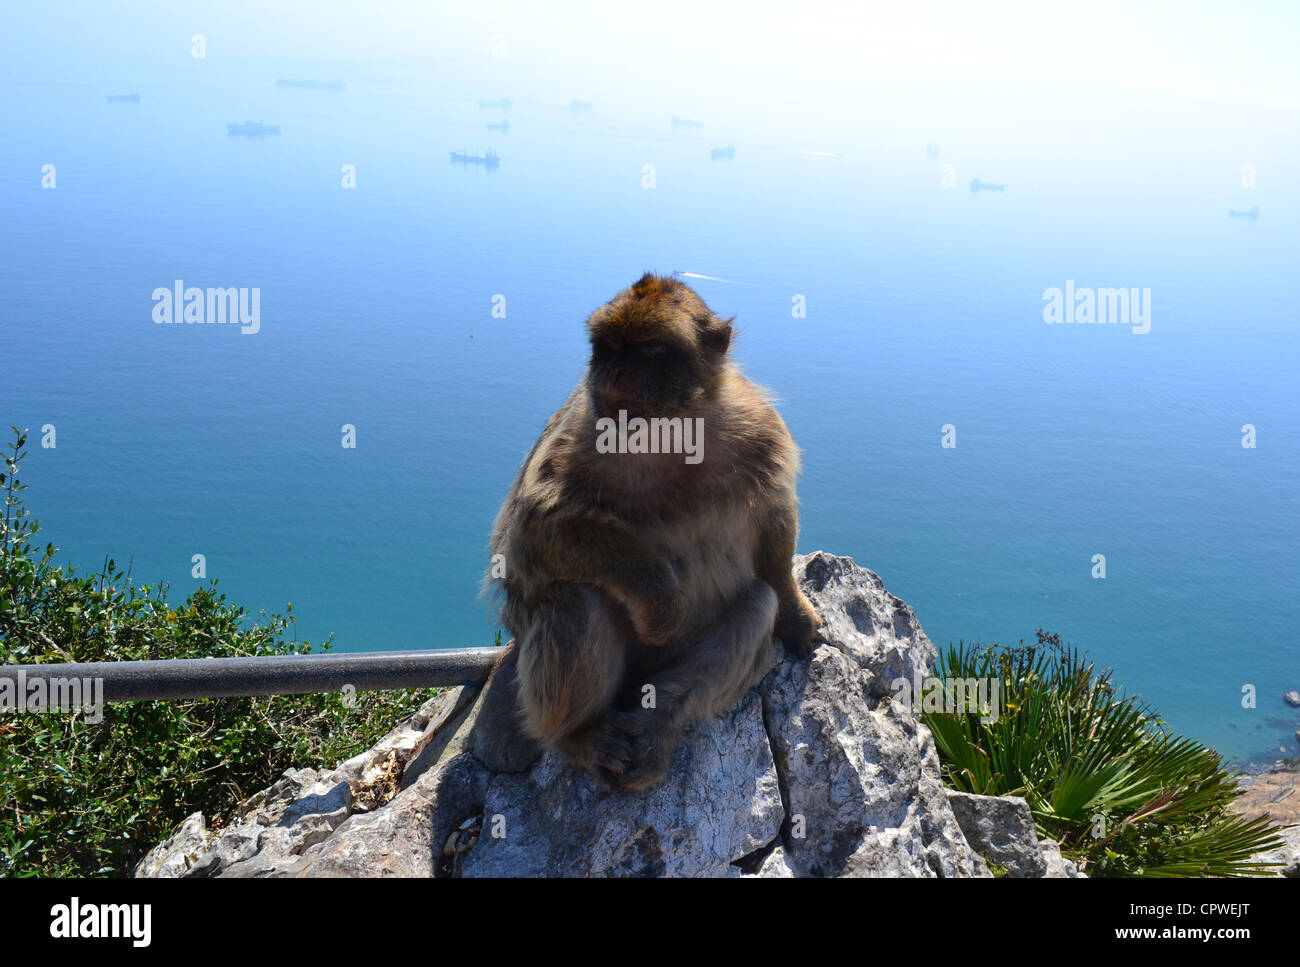 Photograph of a monkey sitting on the edge of a cliff with a beautiful view of the ocean along with ships in the background Stock Photo